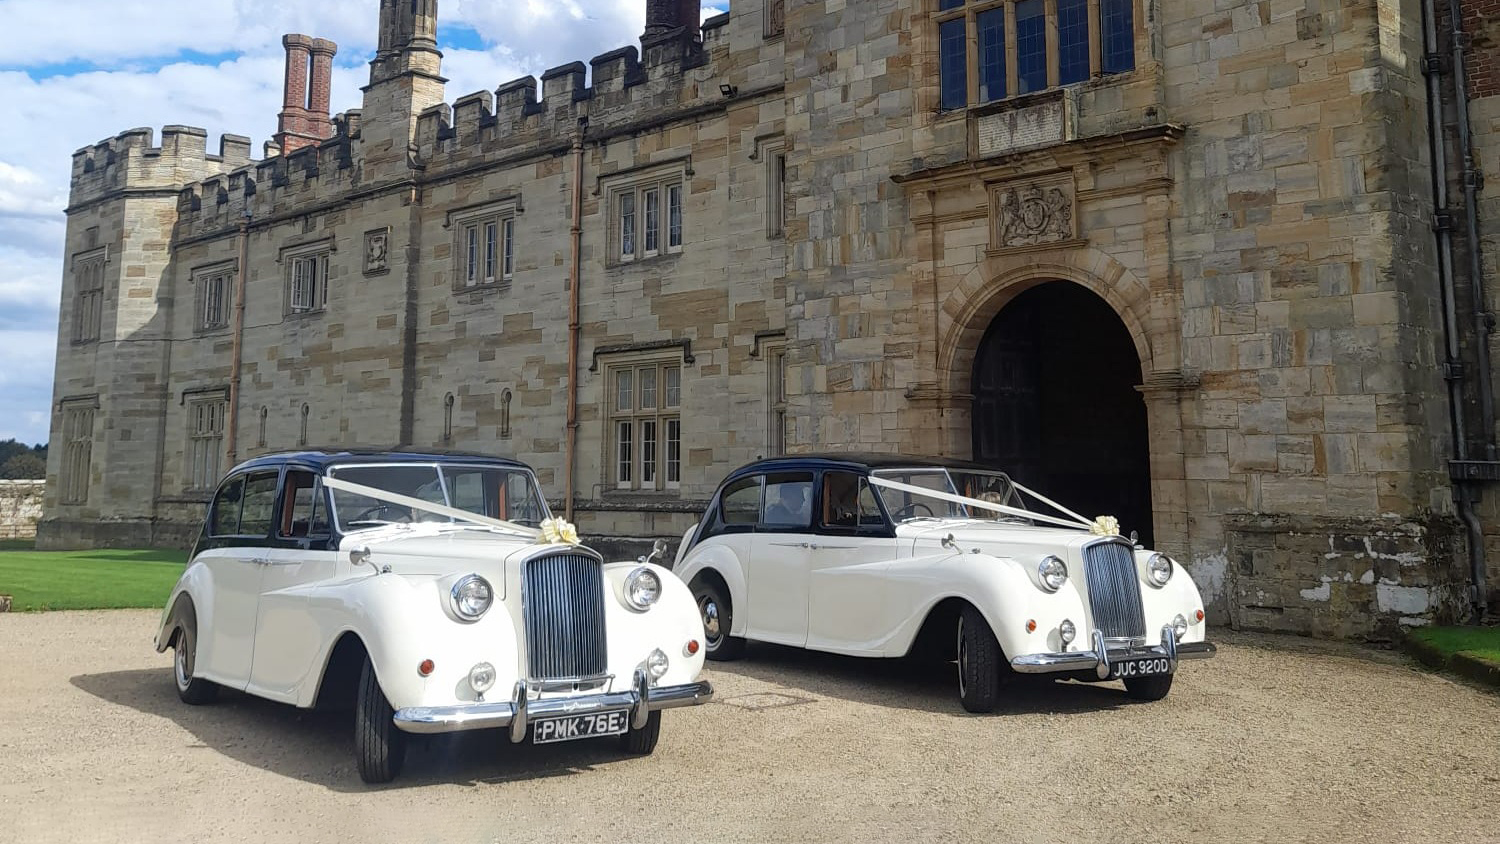 Two Classic Austin Princess Limousine decorated with Ivory Ribbons and Bows on top of the front grill. Vehicles are parked in front of a large manor house in Dover